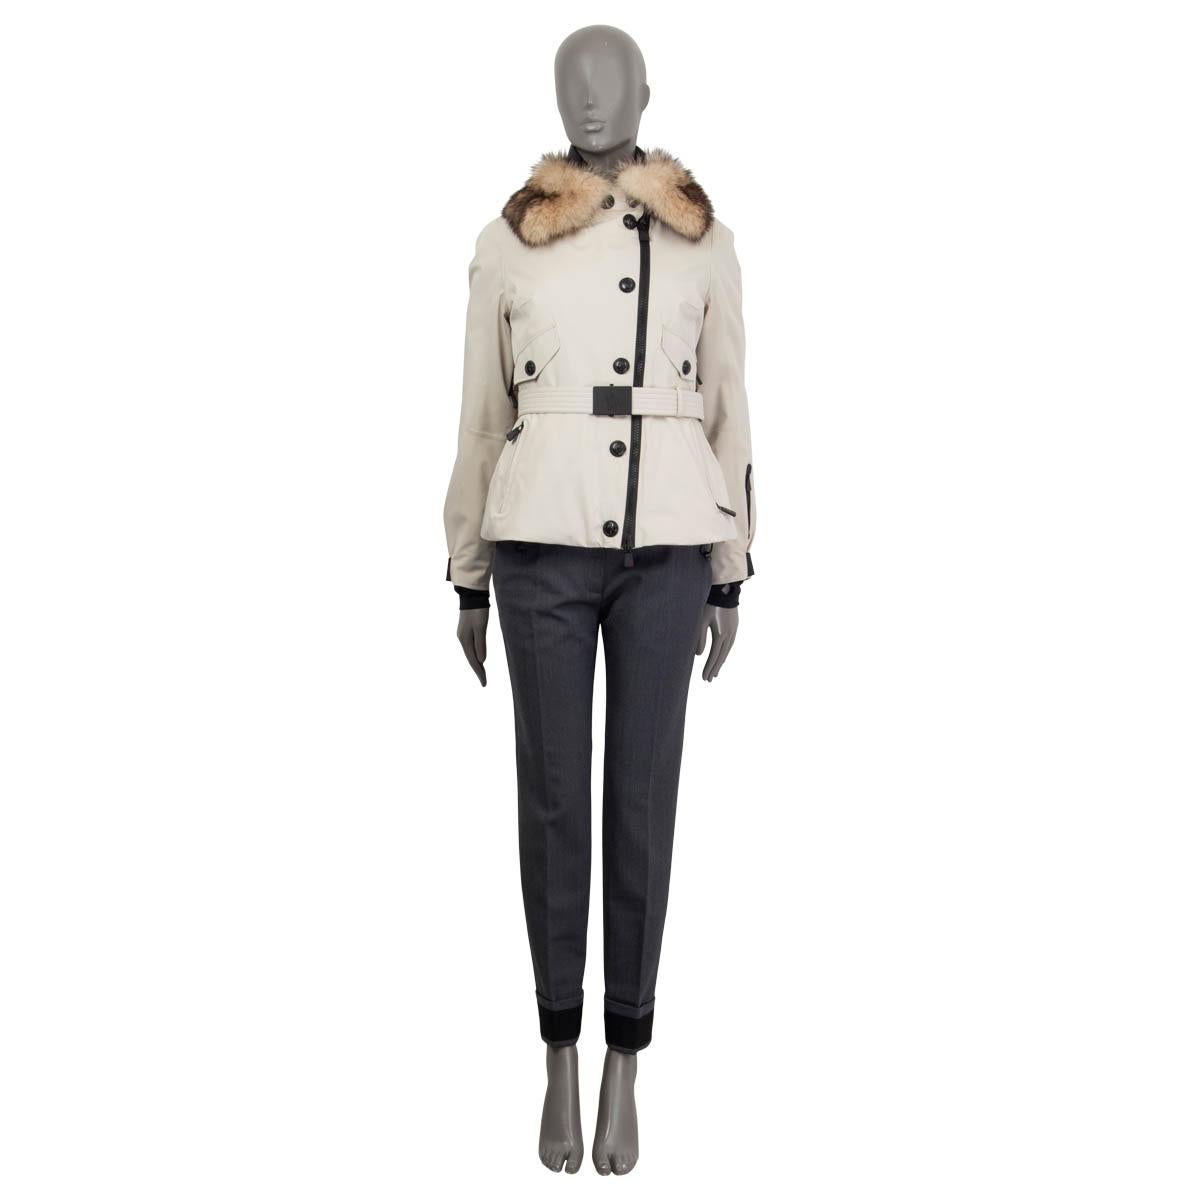 100% authentic Moncler 'Grenoble' belted ski jacket in sand polyamide (87%) and elastane (13%). Features a detachable fur collar, two zipped pockets on the sleeves, two buttoned chest pockets and two zipped pockets on the front. Opens with a zipper